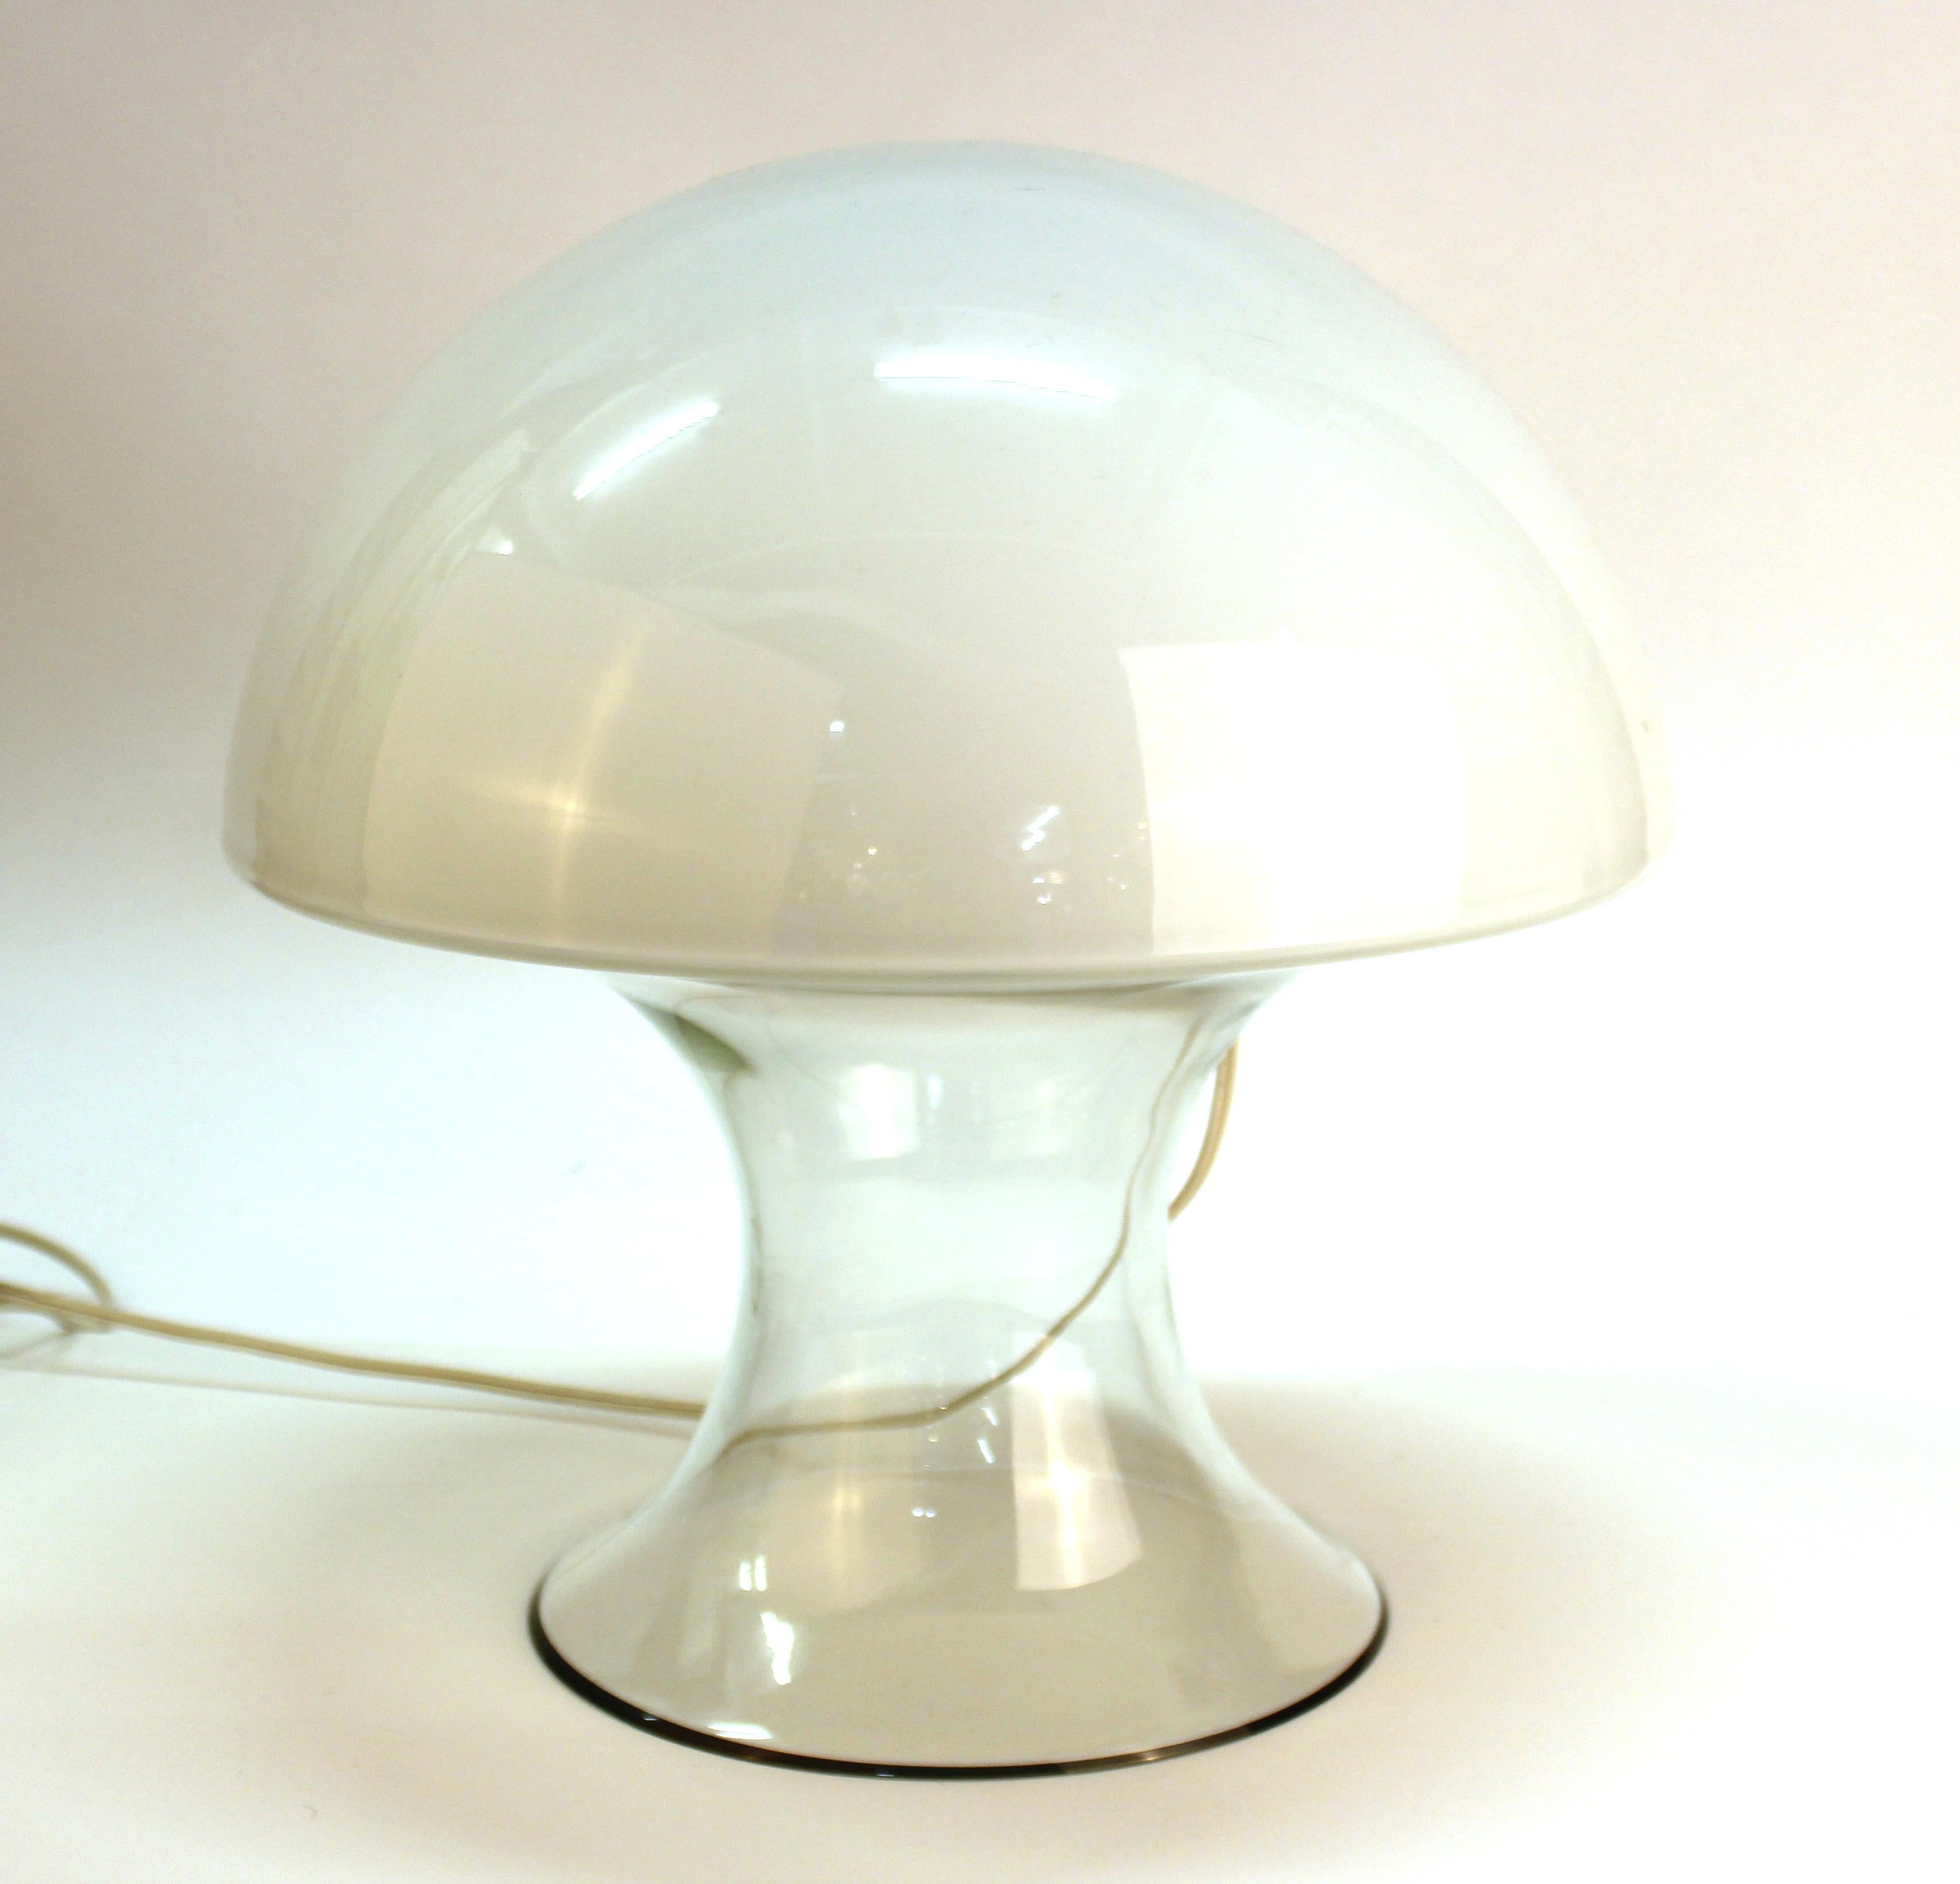 Italian Modern 'Mushroom' table lamp designed by Gino Vistosi in clear and white Murano glass. The piece is in great vintage condition with age-appropriate wear.